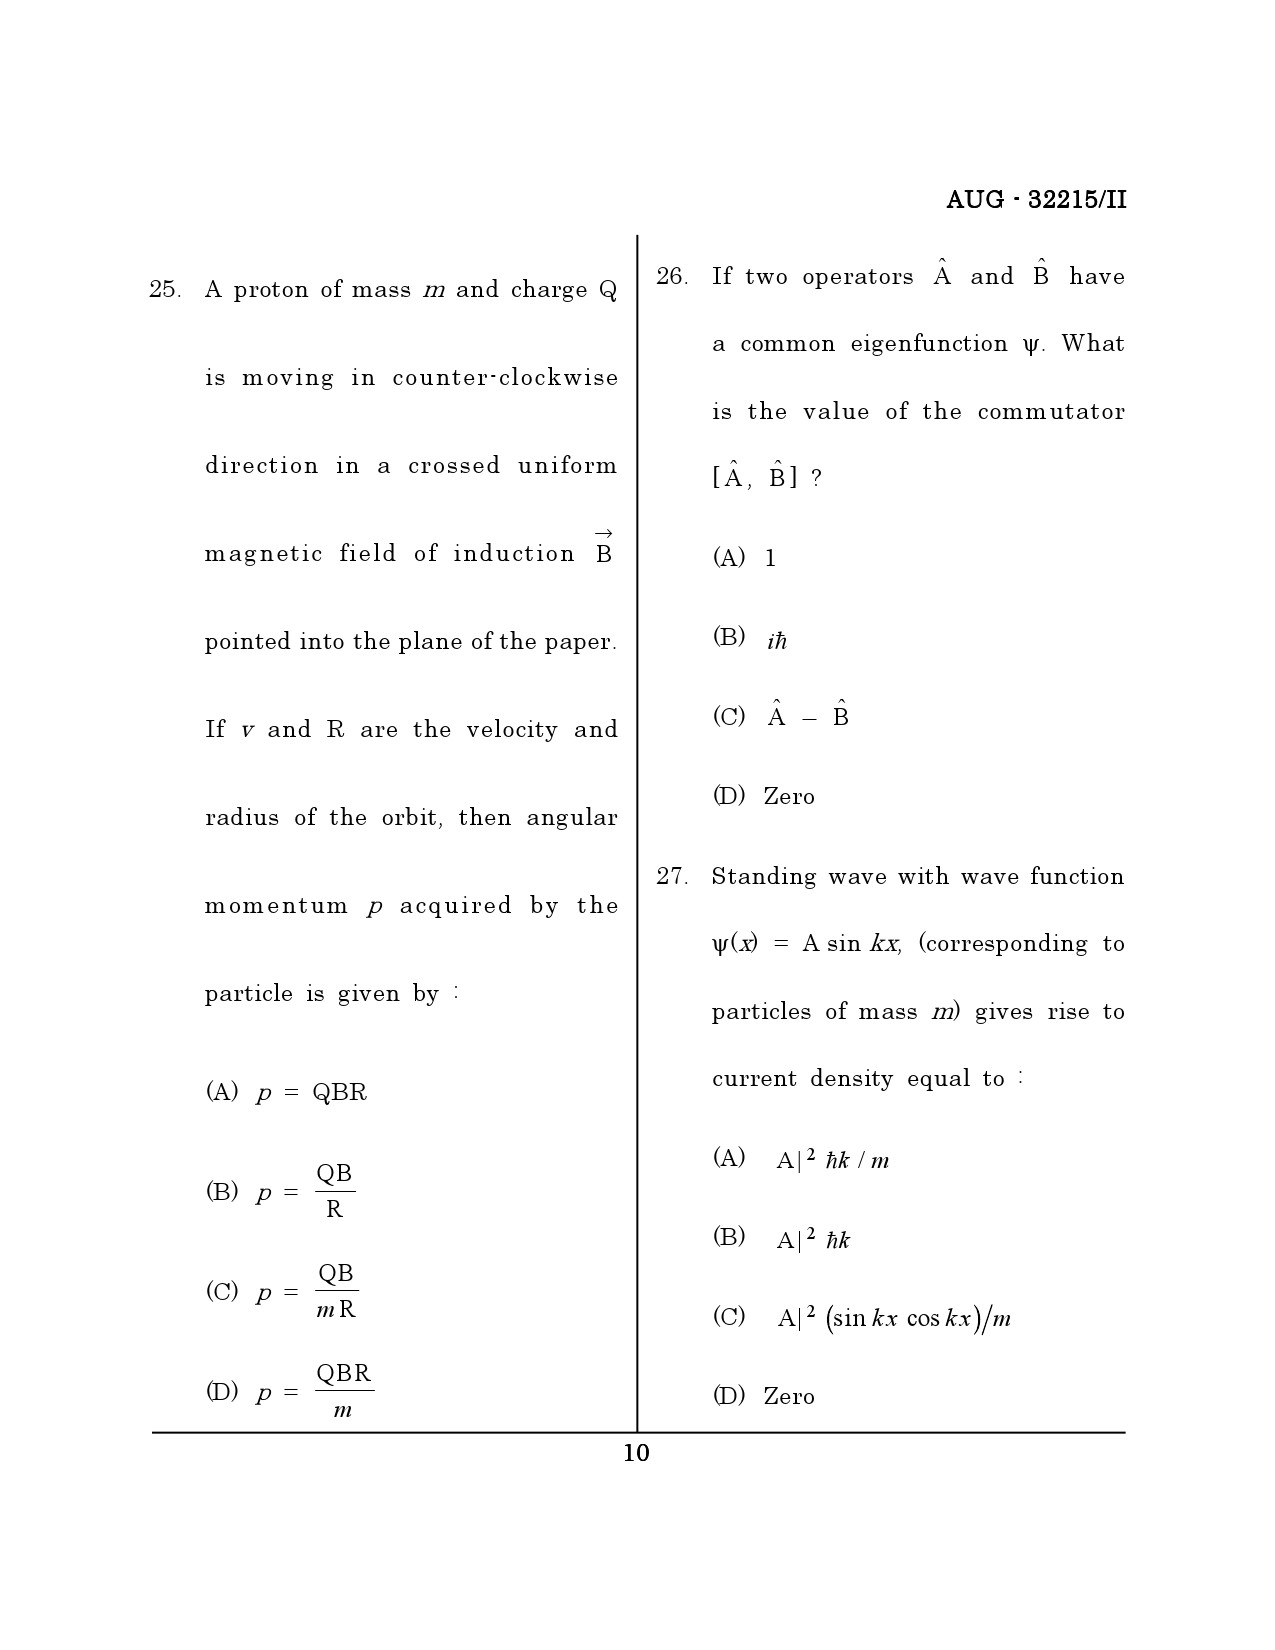 Maharashtra SET Physical Science Question Paper II August 2015 9